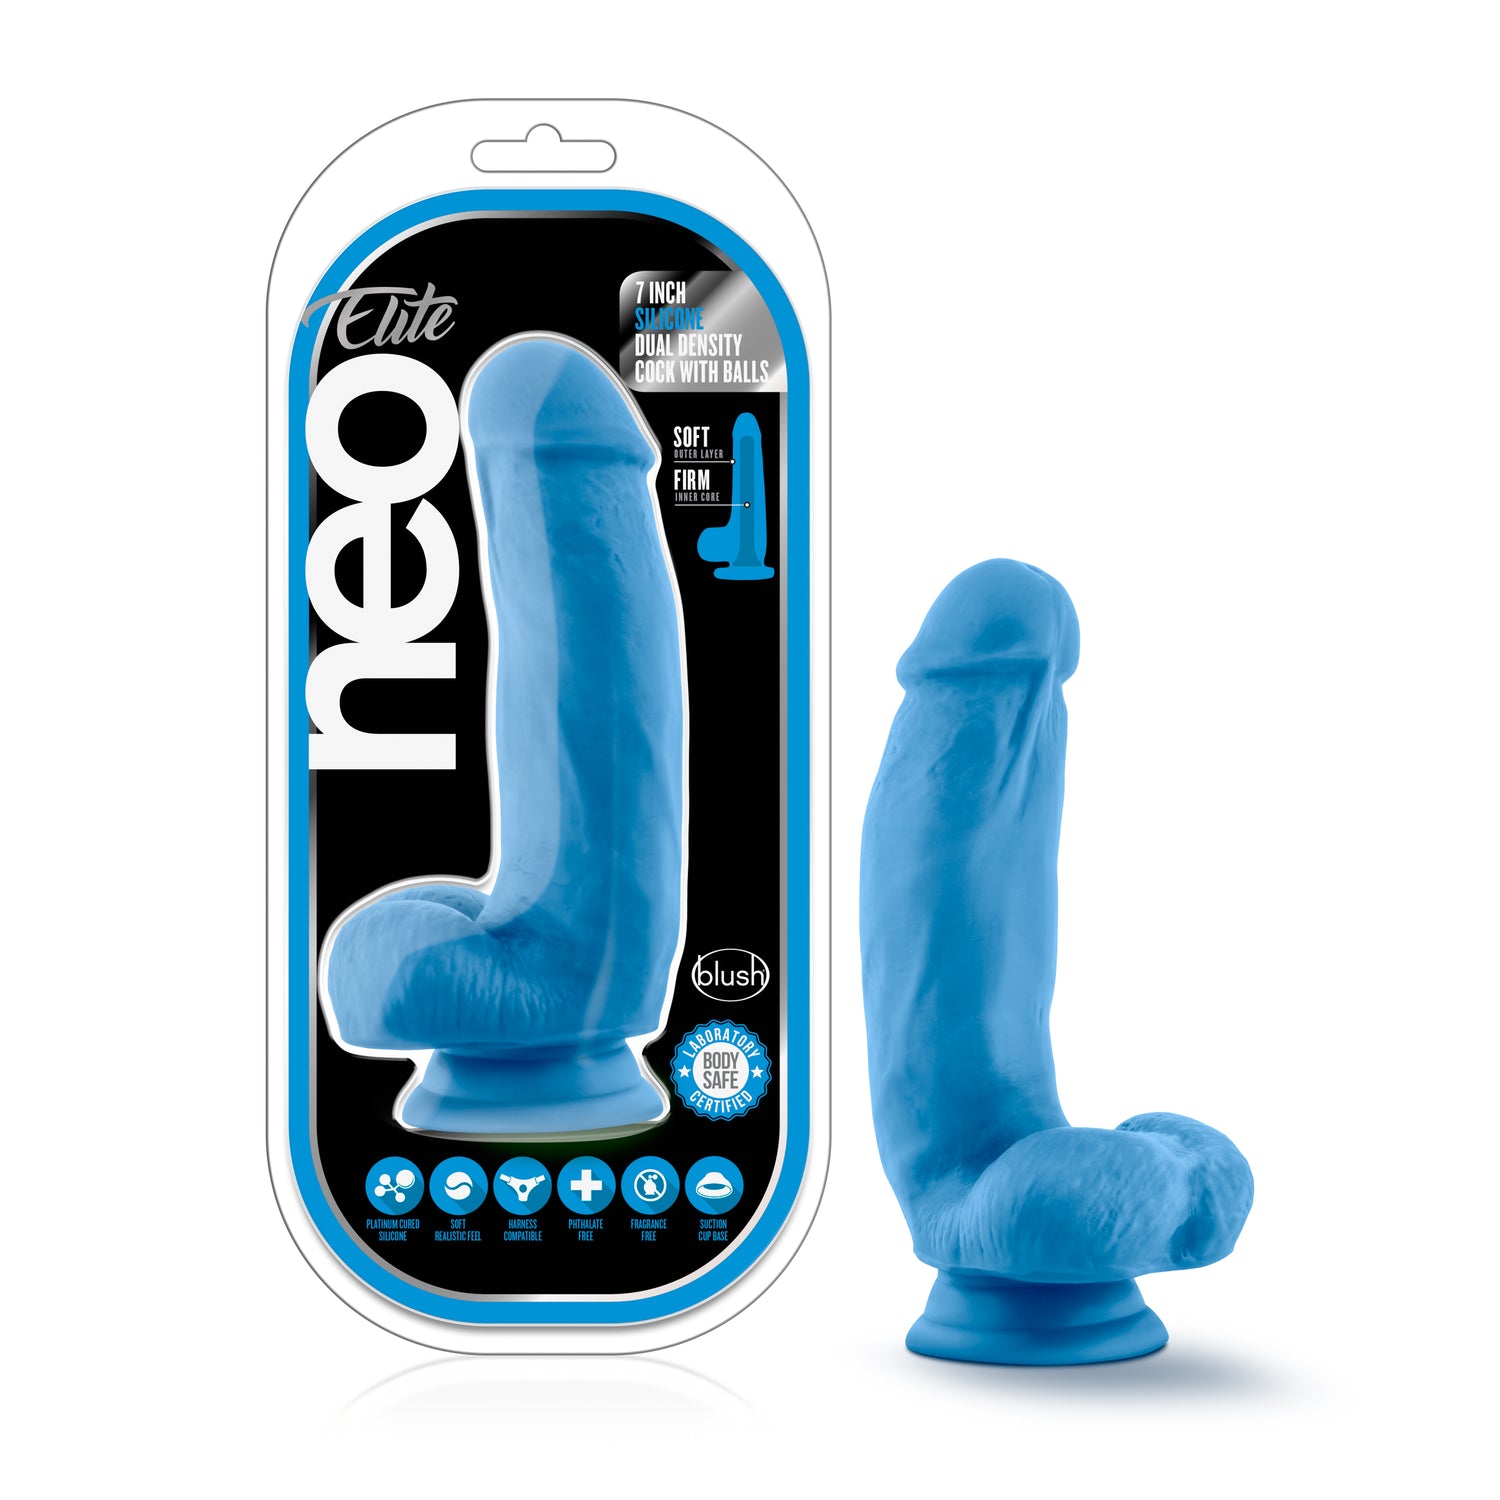 Neo Elite 7in Silicone Dual Density Cock with Balls Neon Blue - Just for you desires